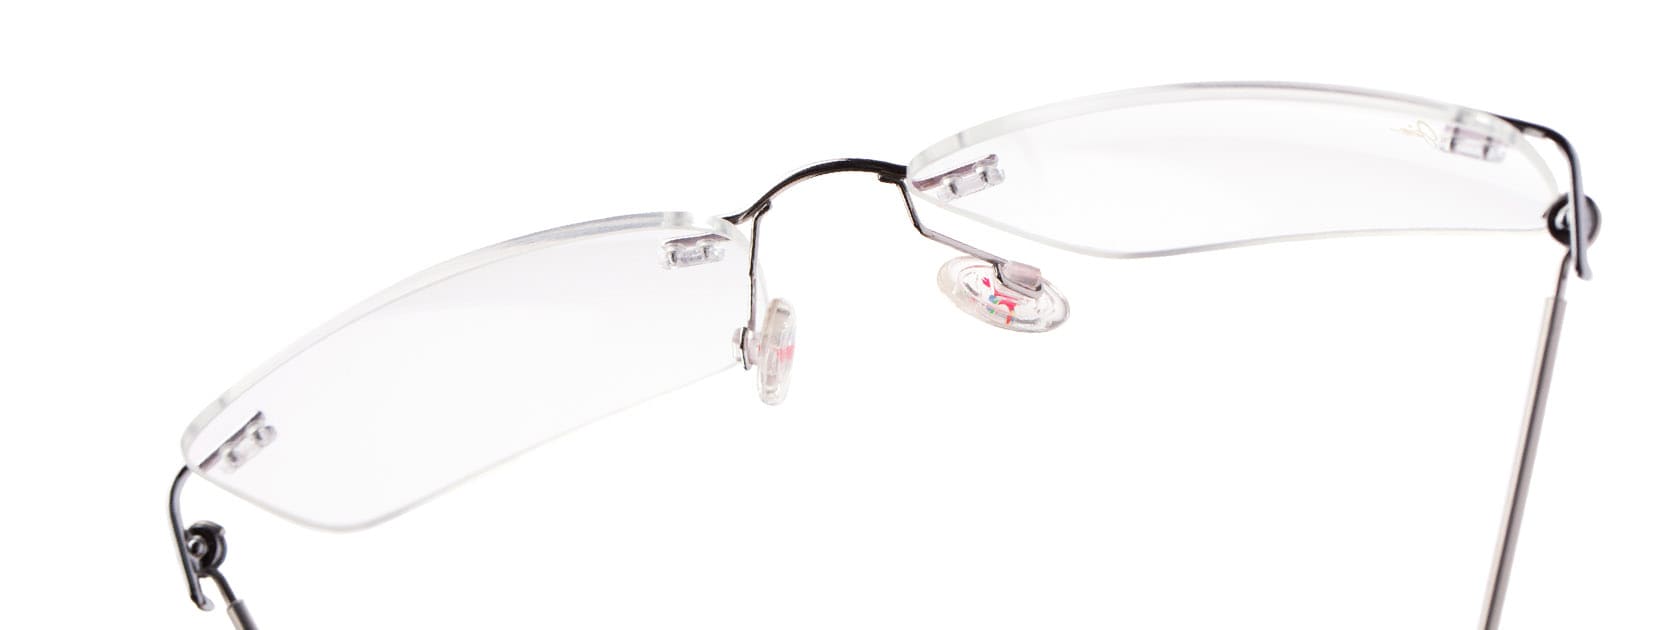 frameless ophthalmic glasses displayed over white background